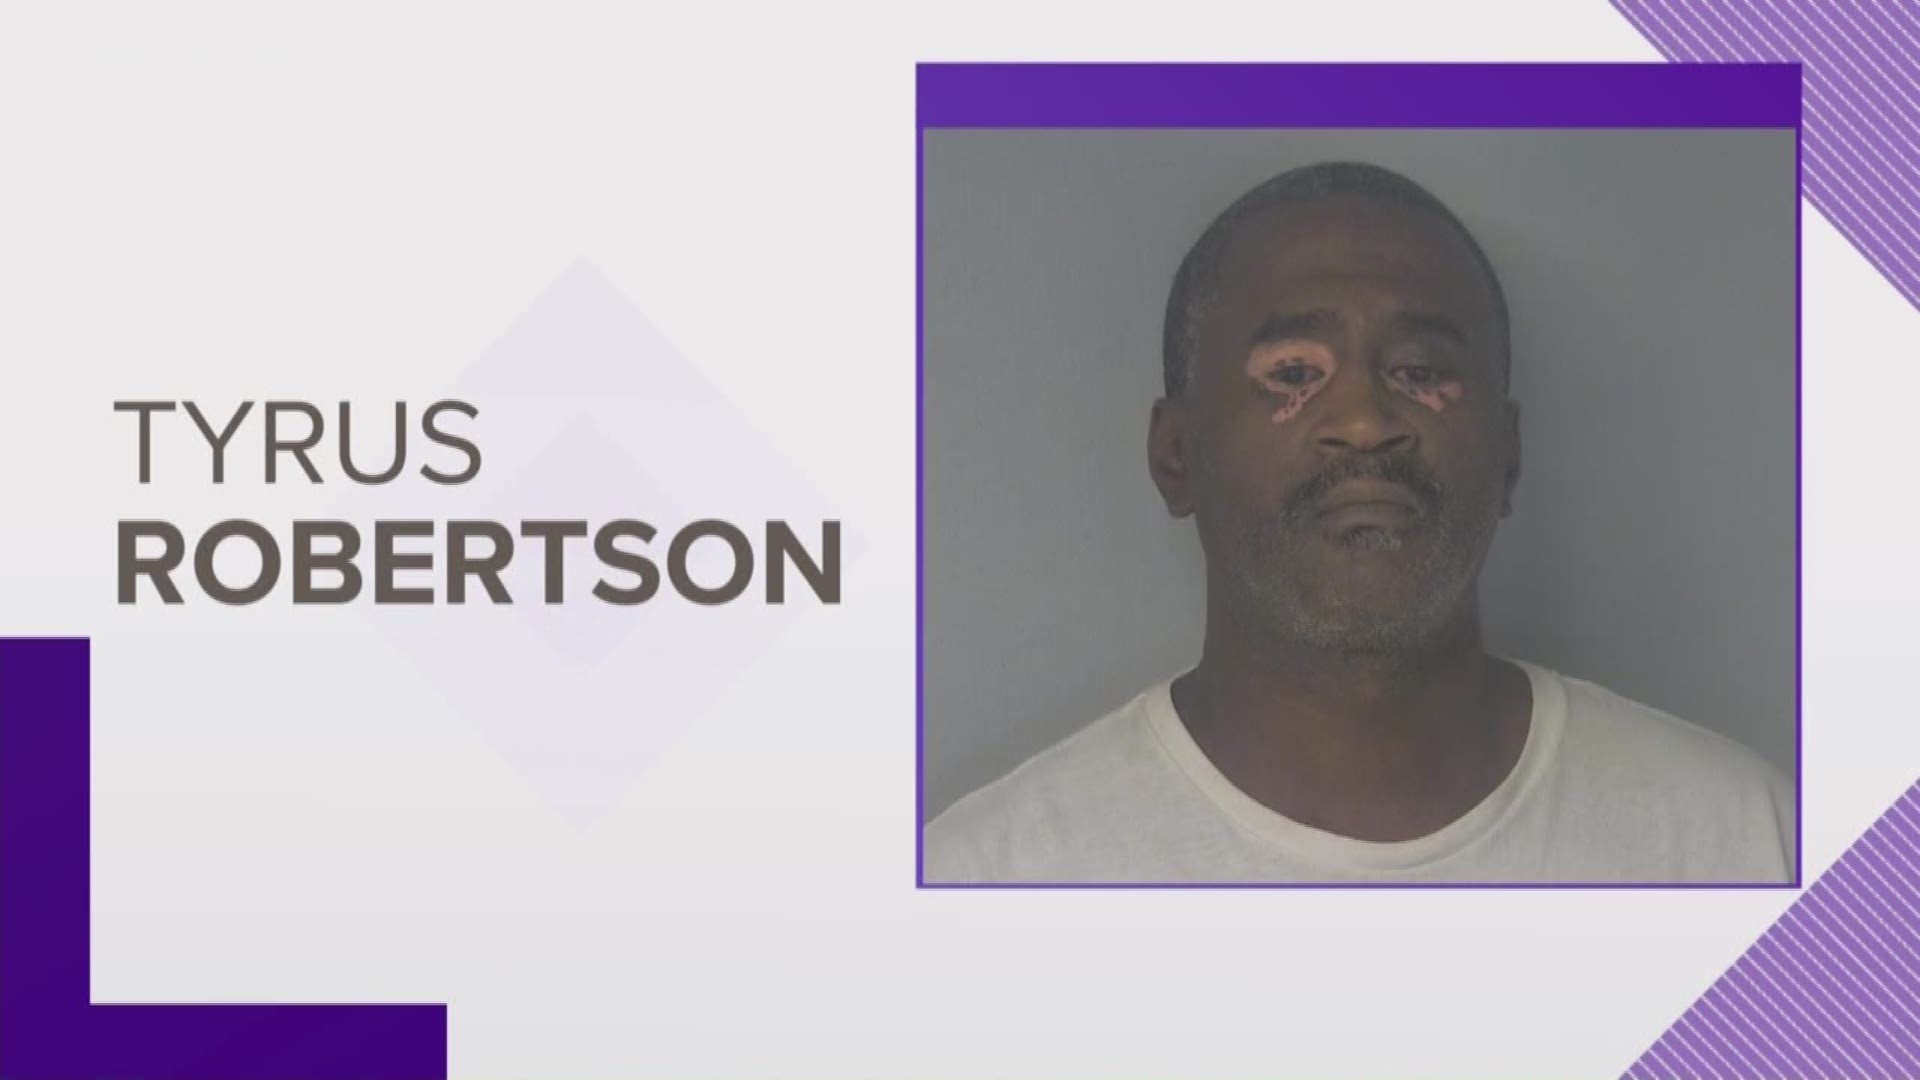 Police said a man exposed himself to a 7-year-old girl. Tyrus Robertson has been charged with aggravated sexual battery.